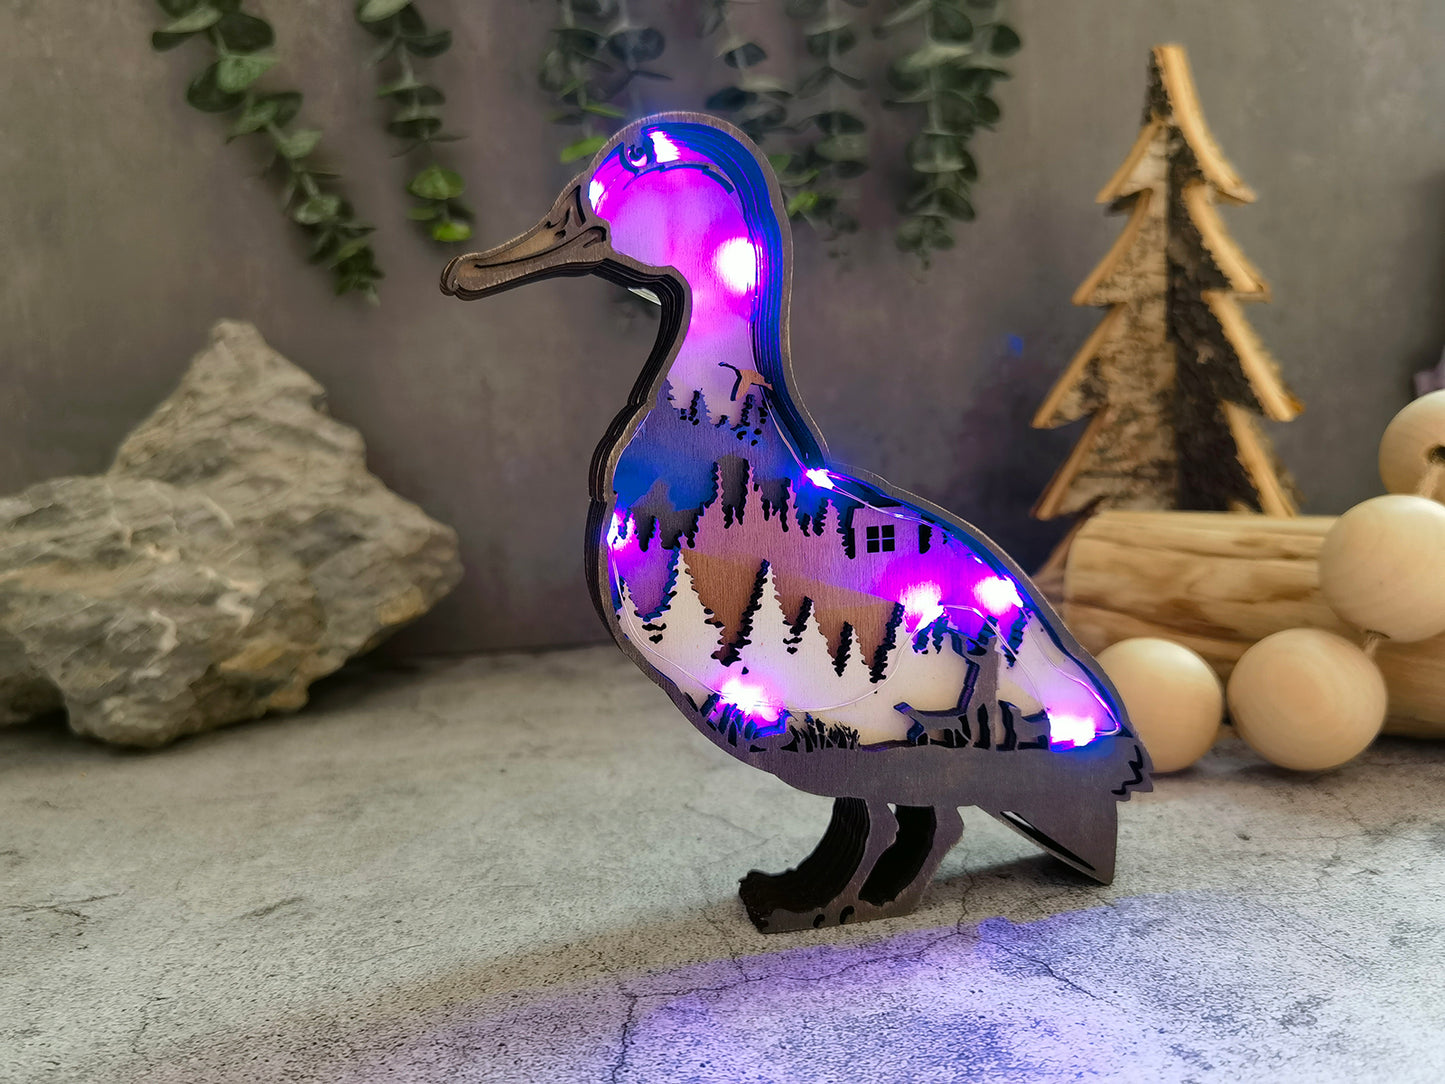 3D Wooden Mallard carved with lights ,Wooden Forest Scene,Desktop ornaments,Wall Decoration,Door Decor,Free Engraving